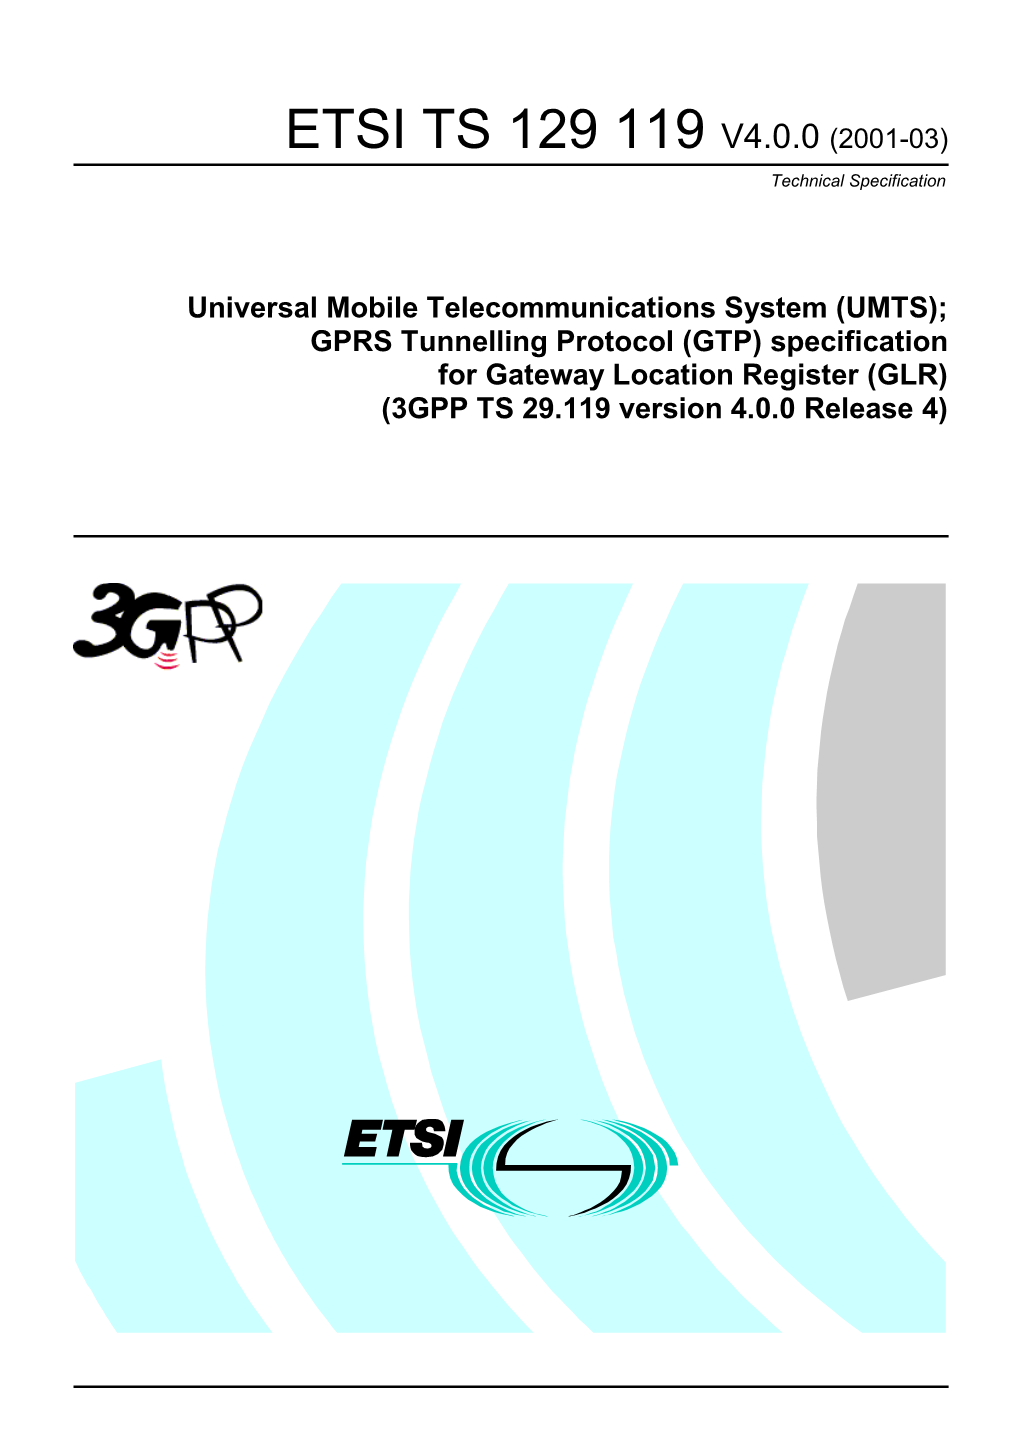 GPRS Tunnelling Protocol (GTP) Specification for Gateway Location Register (GLR) (3GPP TS 29.119 Version 4.0.0 Release 4)